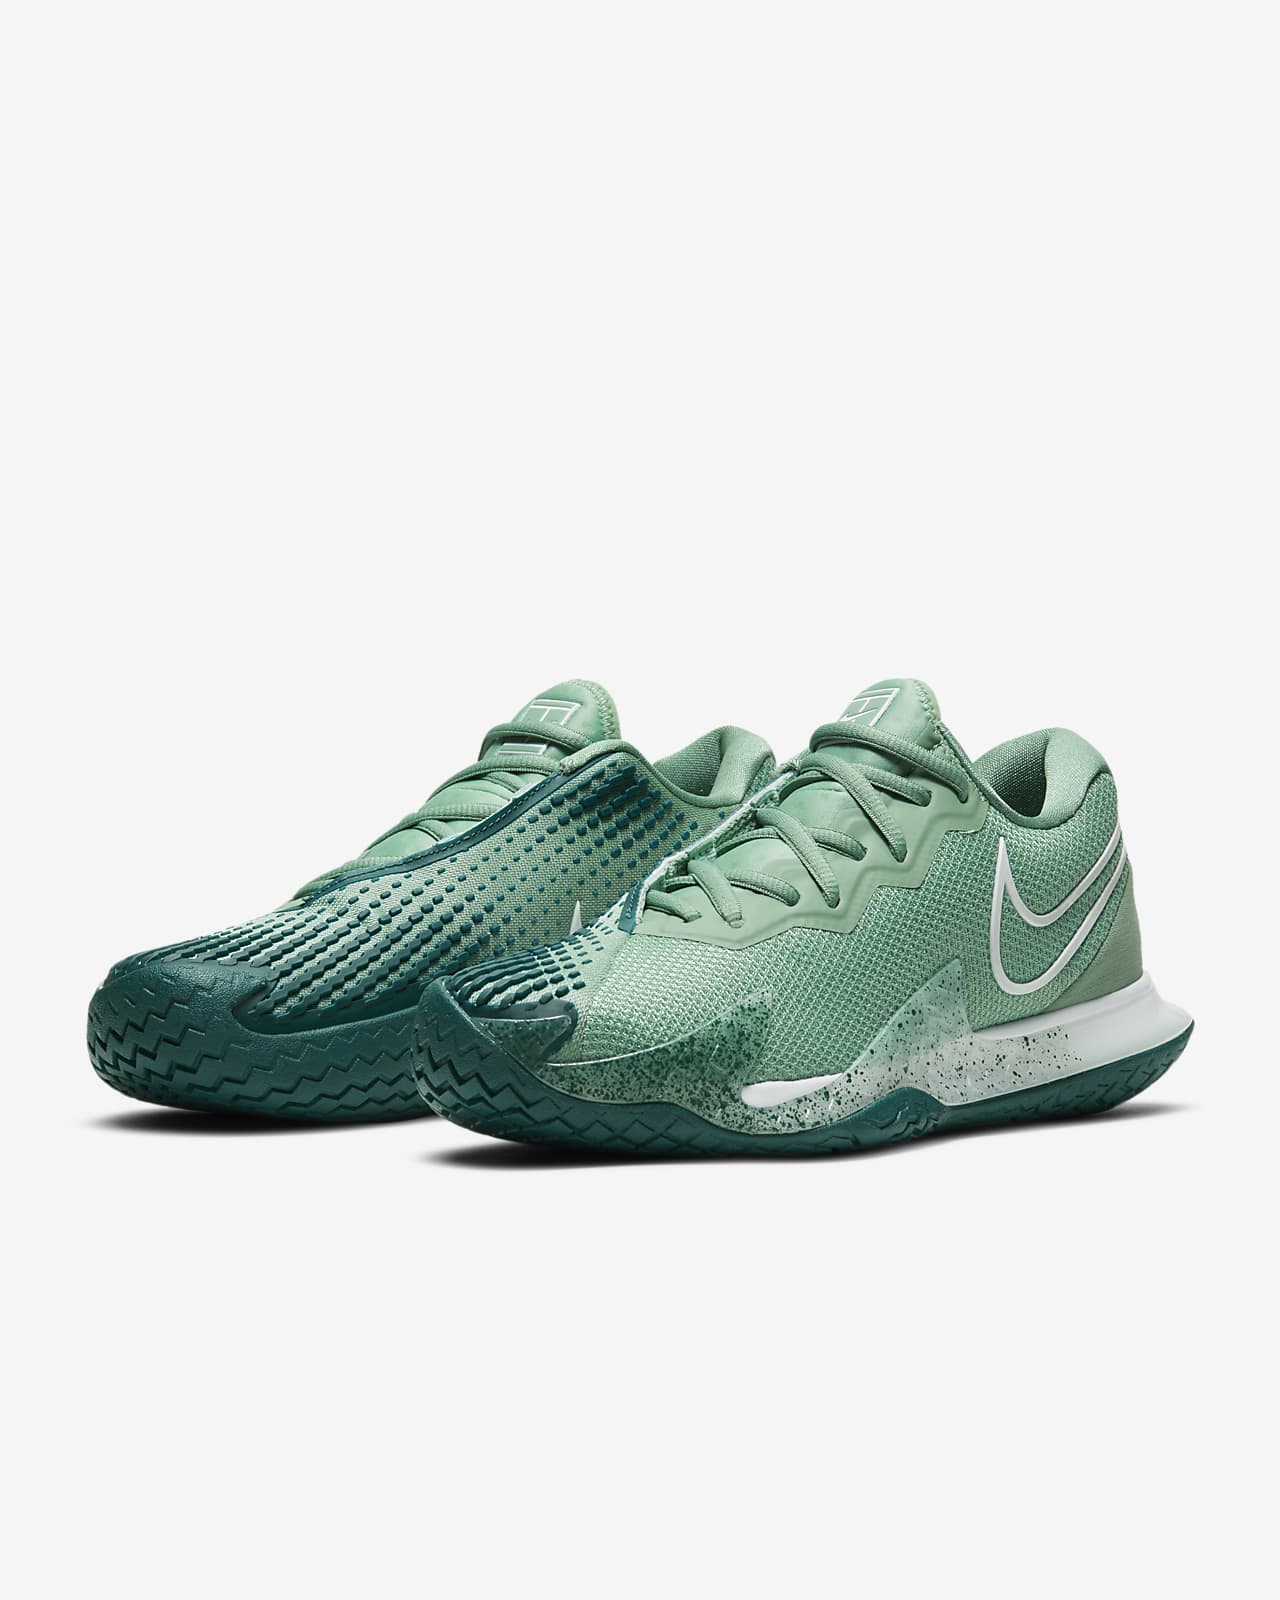 nike cage tennis shoes